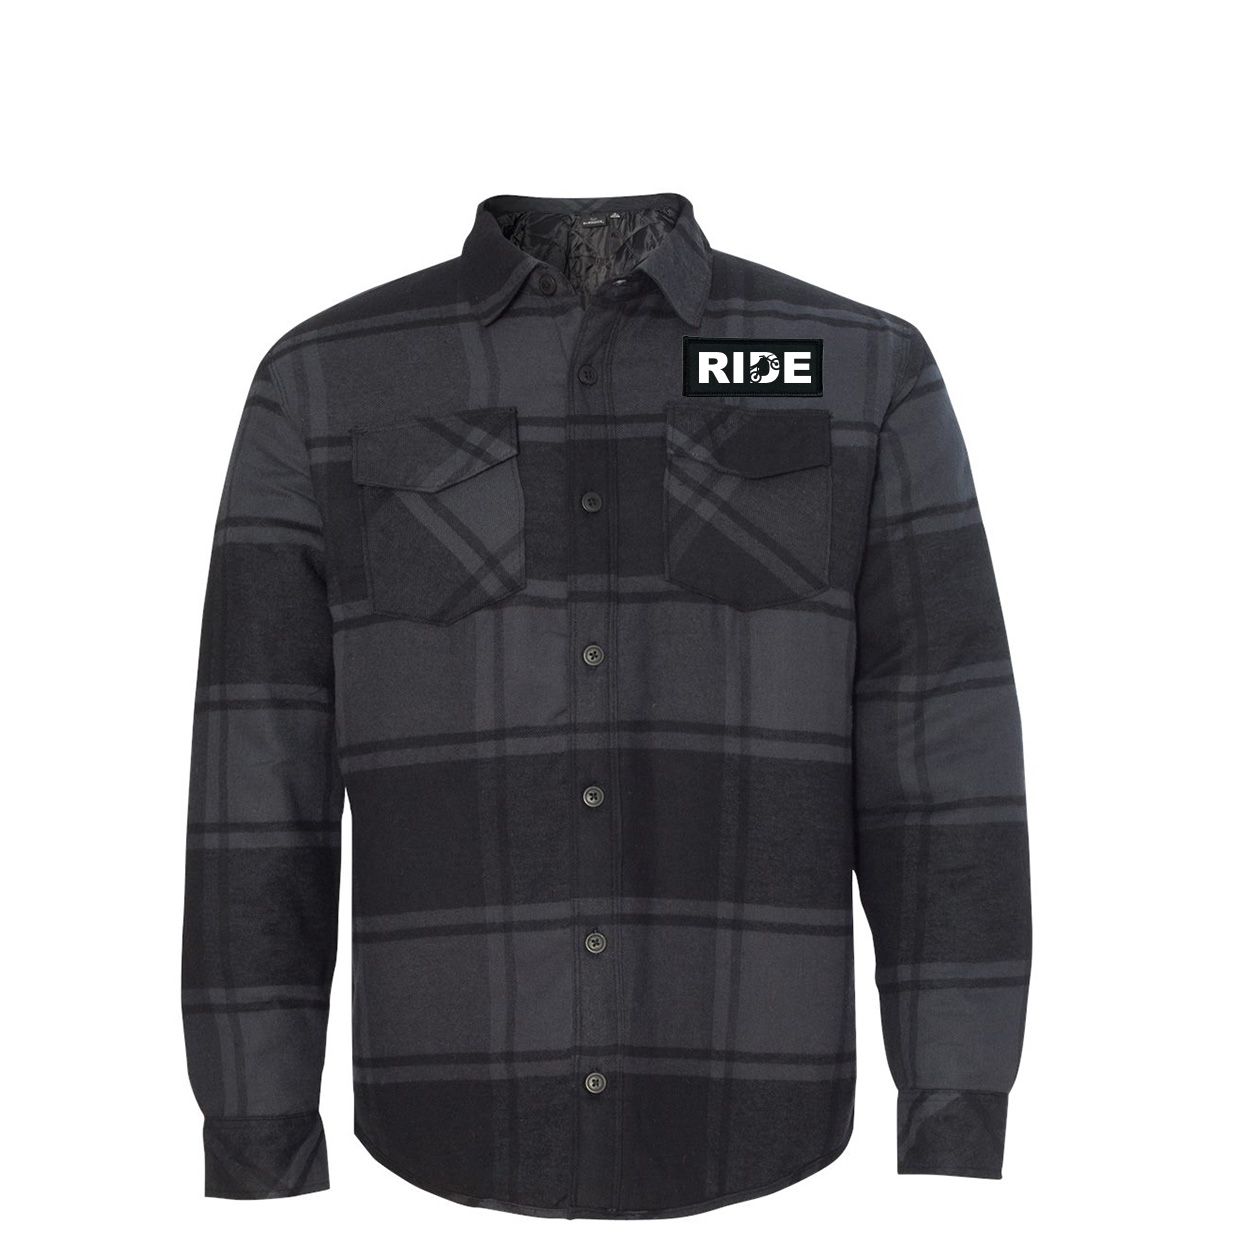 Ride Moto Logo Classic Unisex Woven Patch Quilted Button Flannel Jacket Black/Plaid (White Logo)